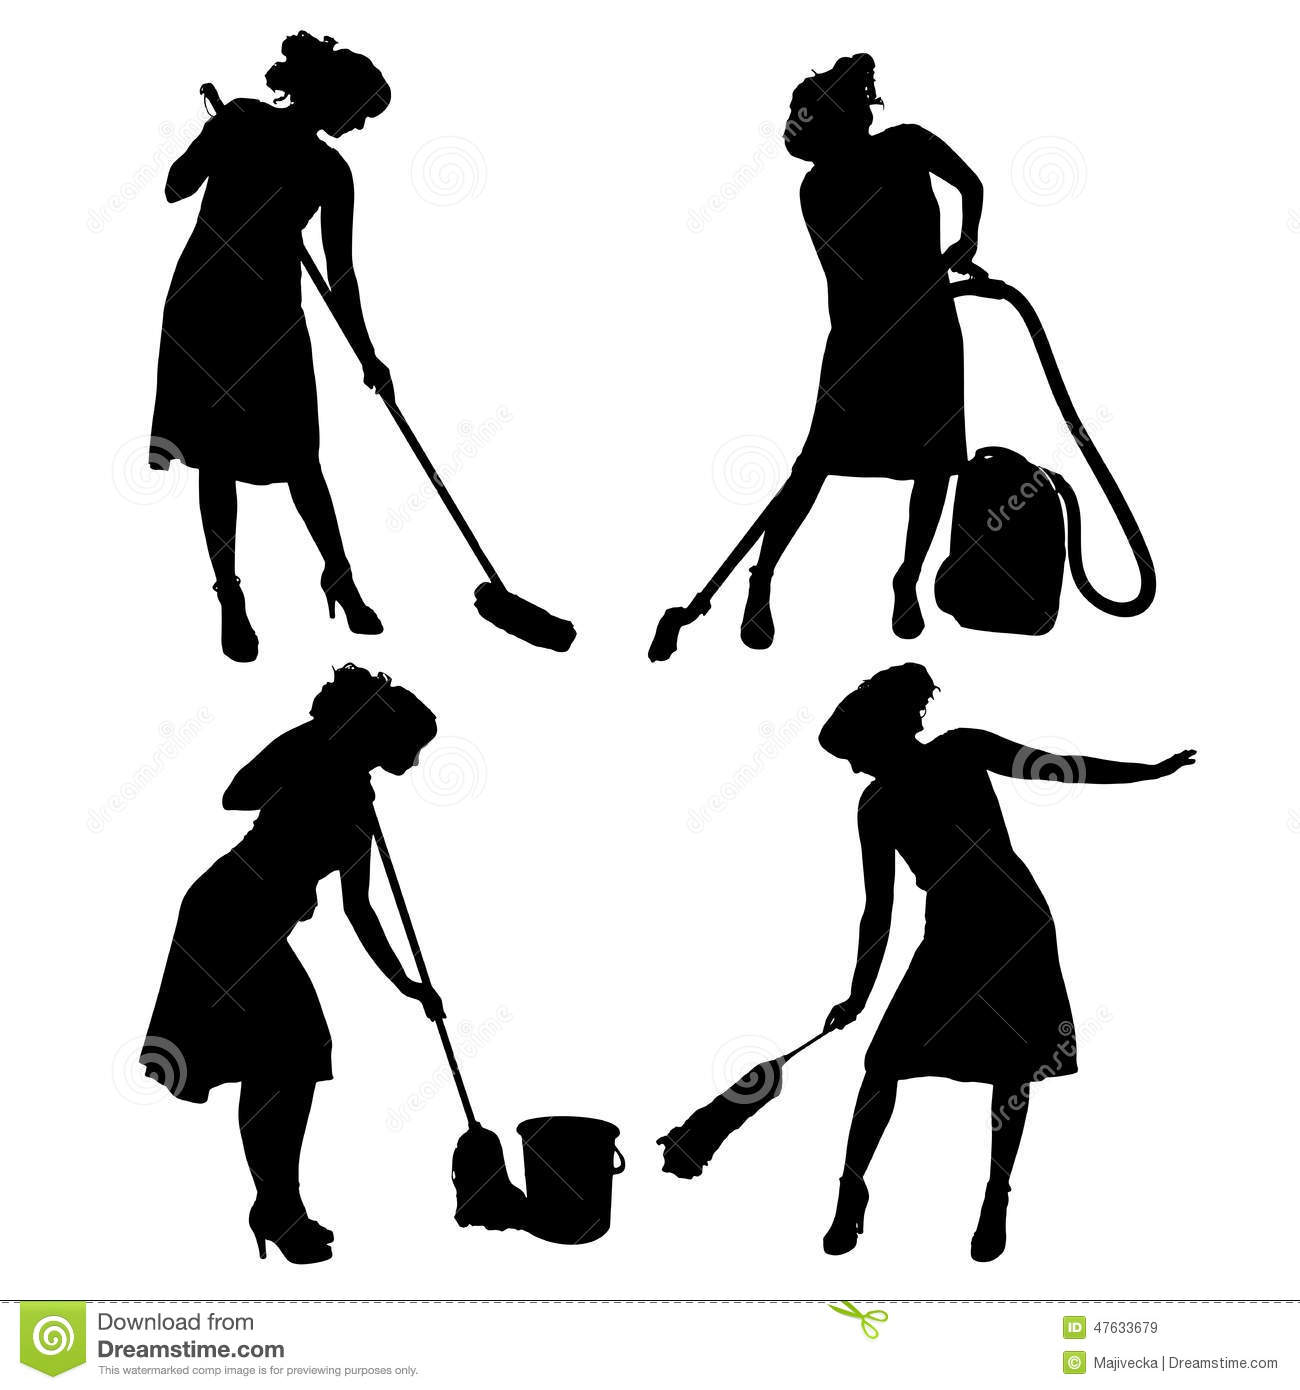 Cleaning Lady Silhouette Clip Art